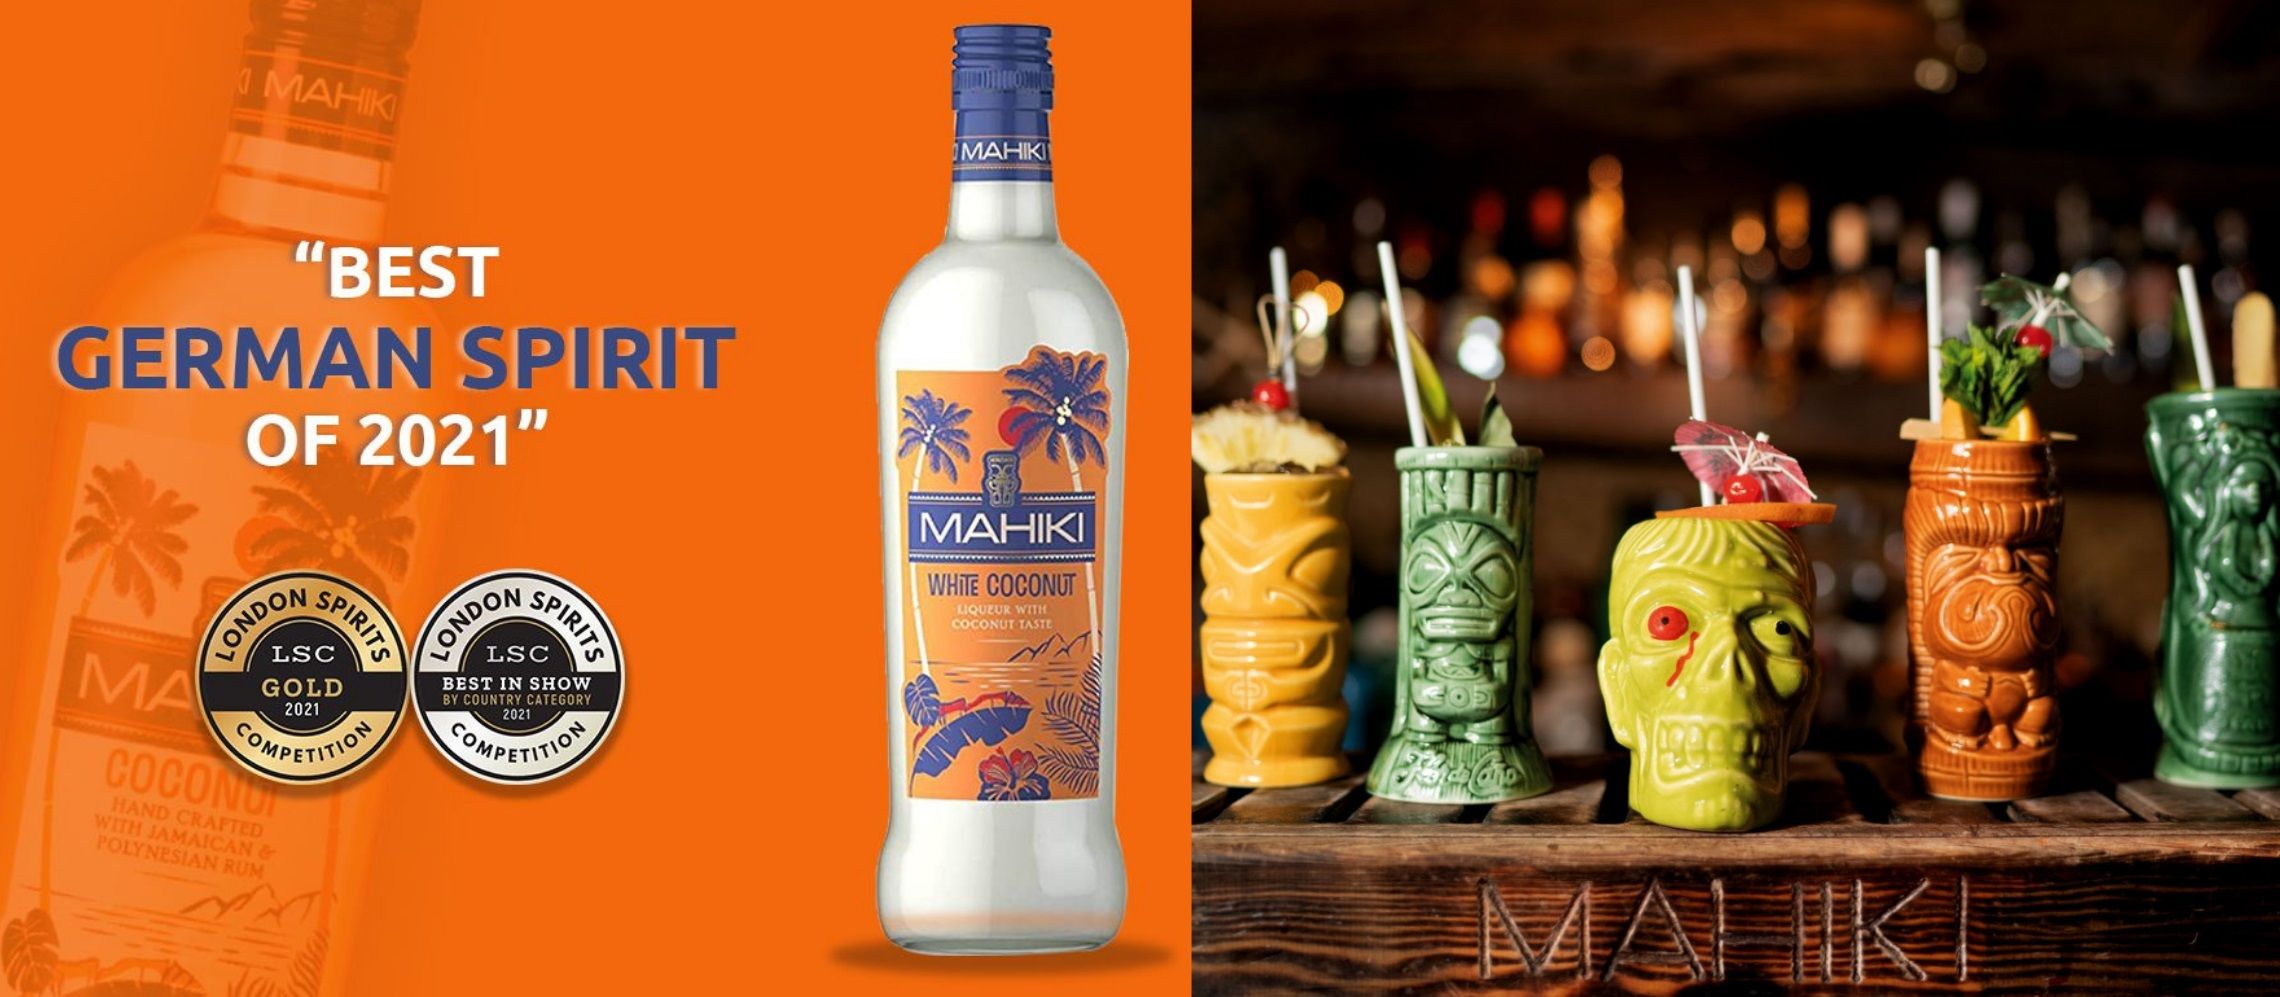 Photo for: Mahiki White Coconut is the Best German Spirit